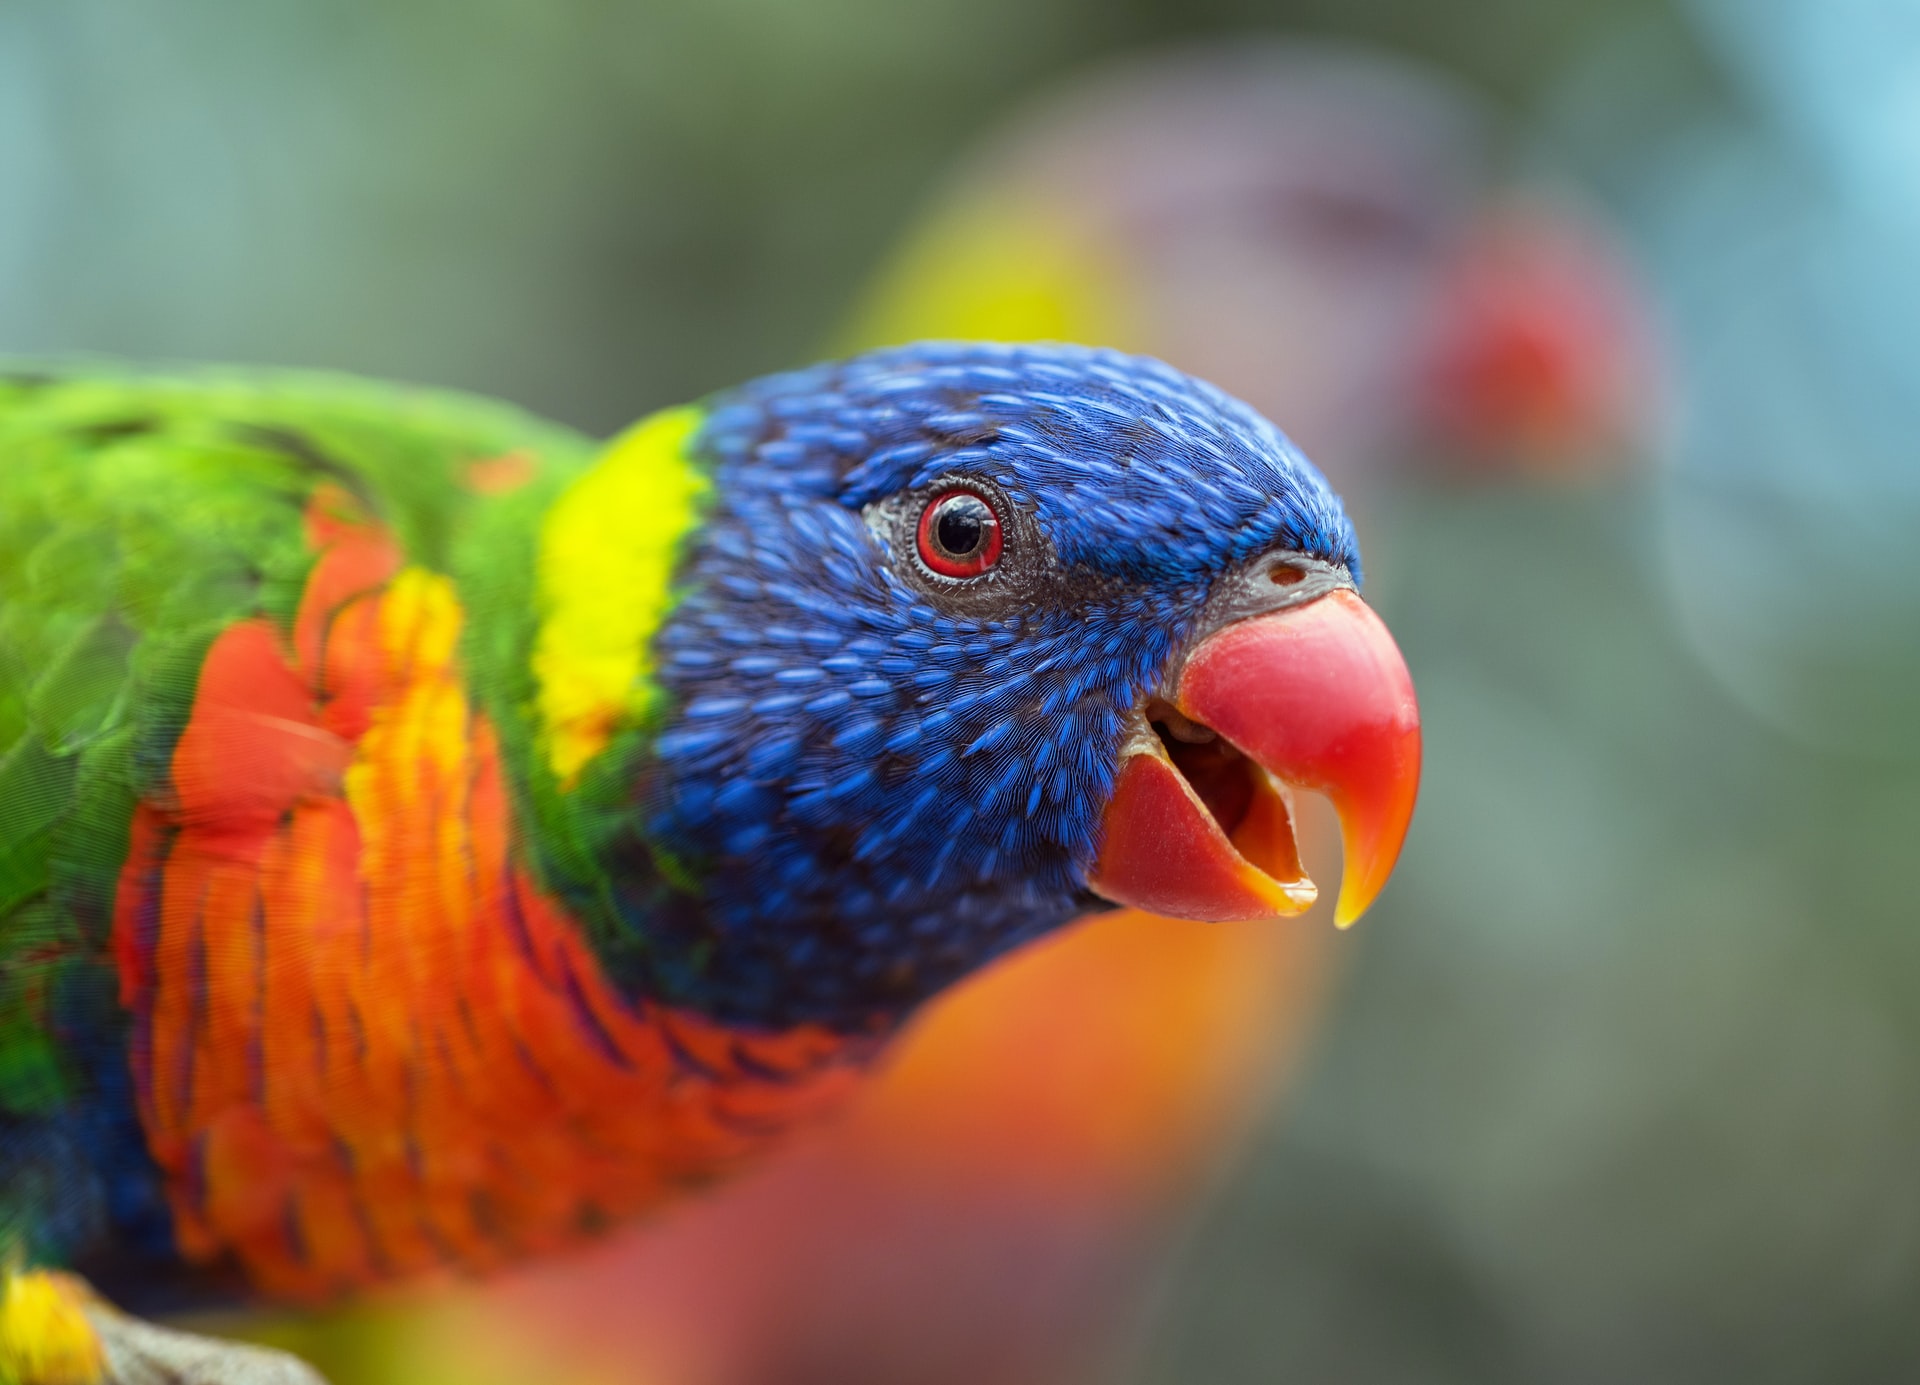 Solutions to behavioural problems in Parrots